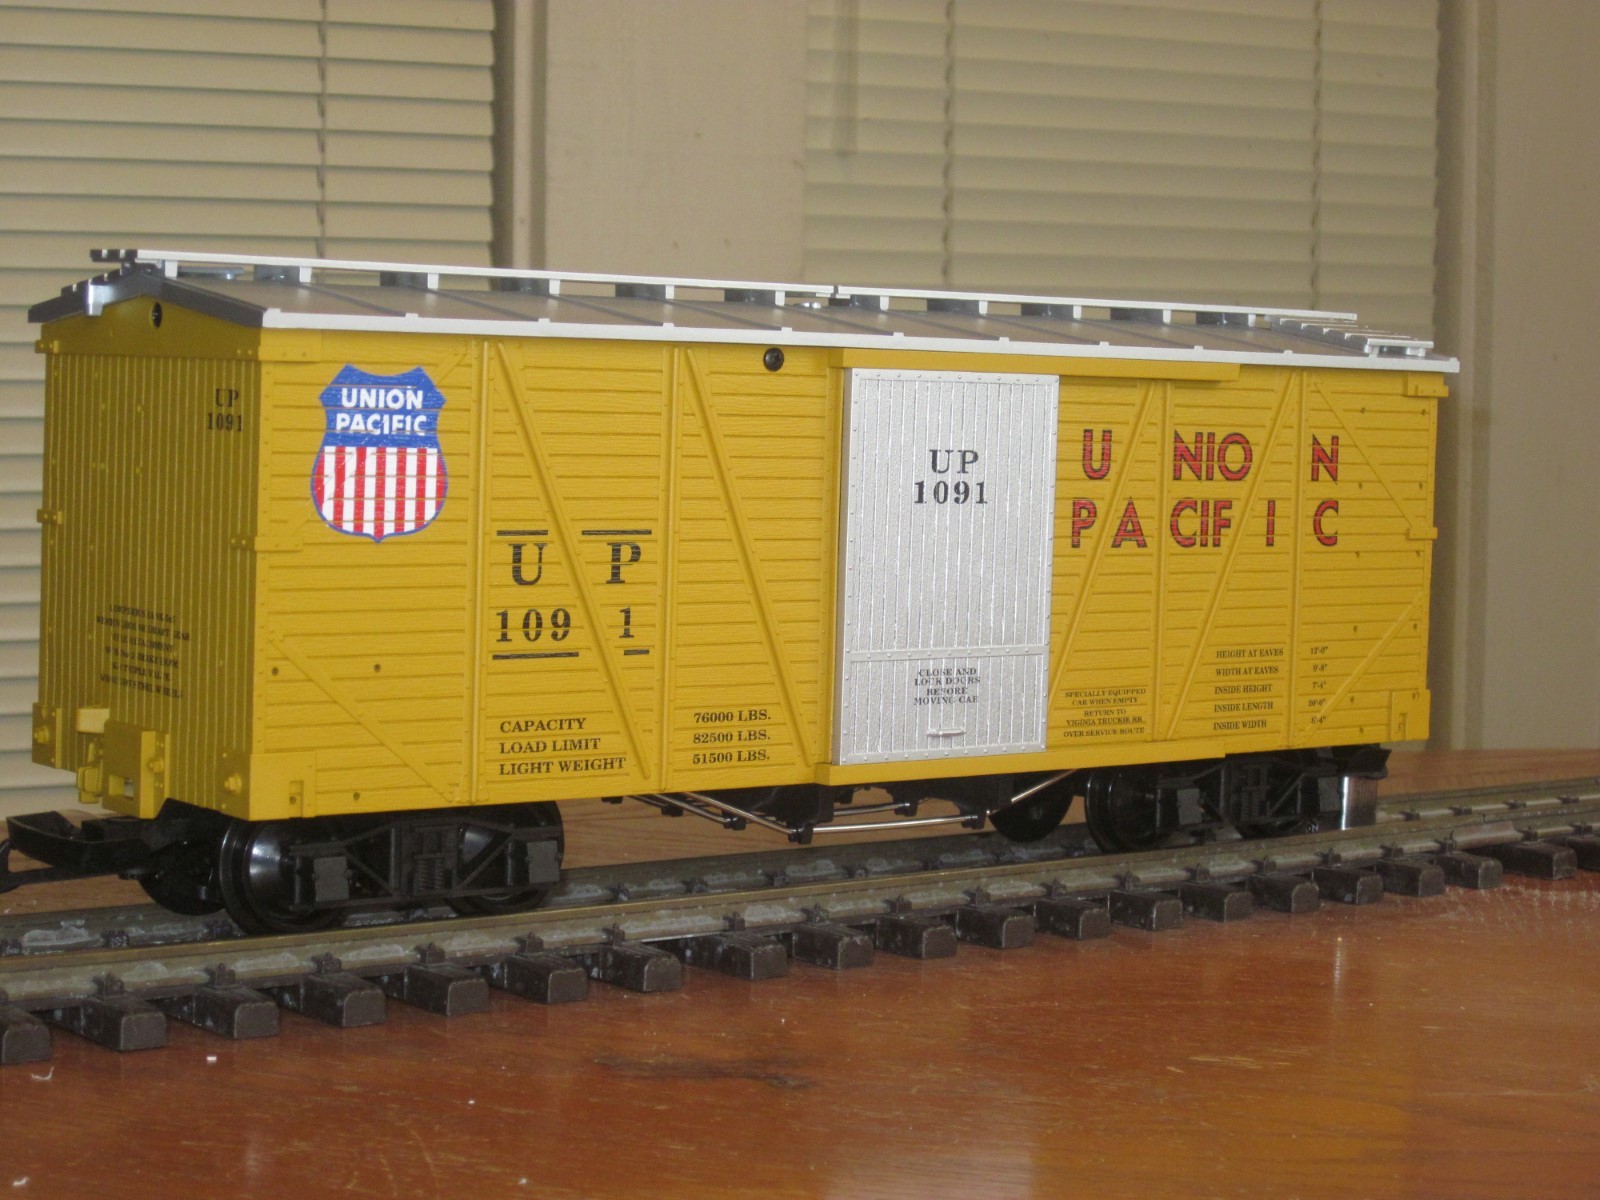 R1454B Union Pacific #UP 1091